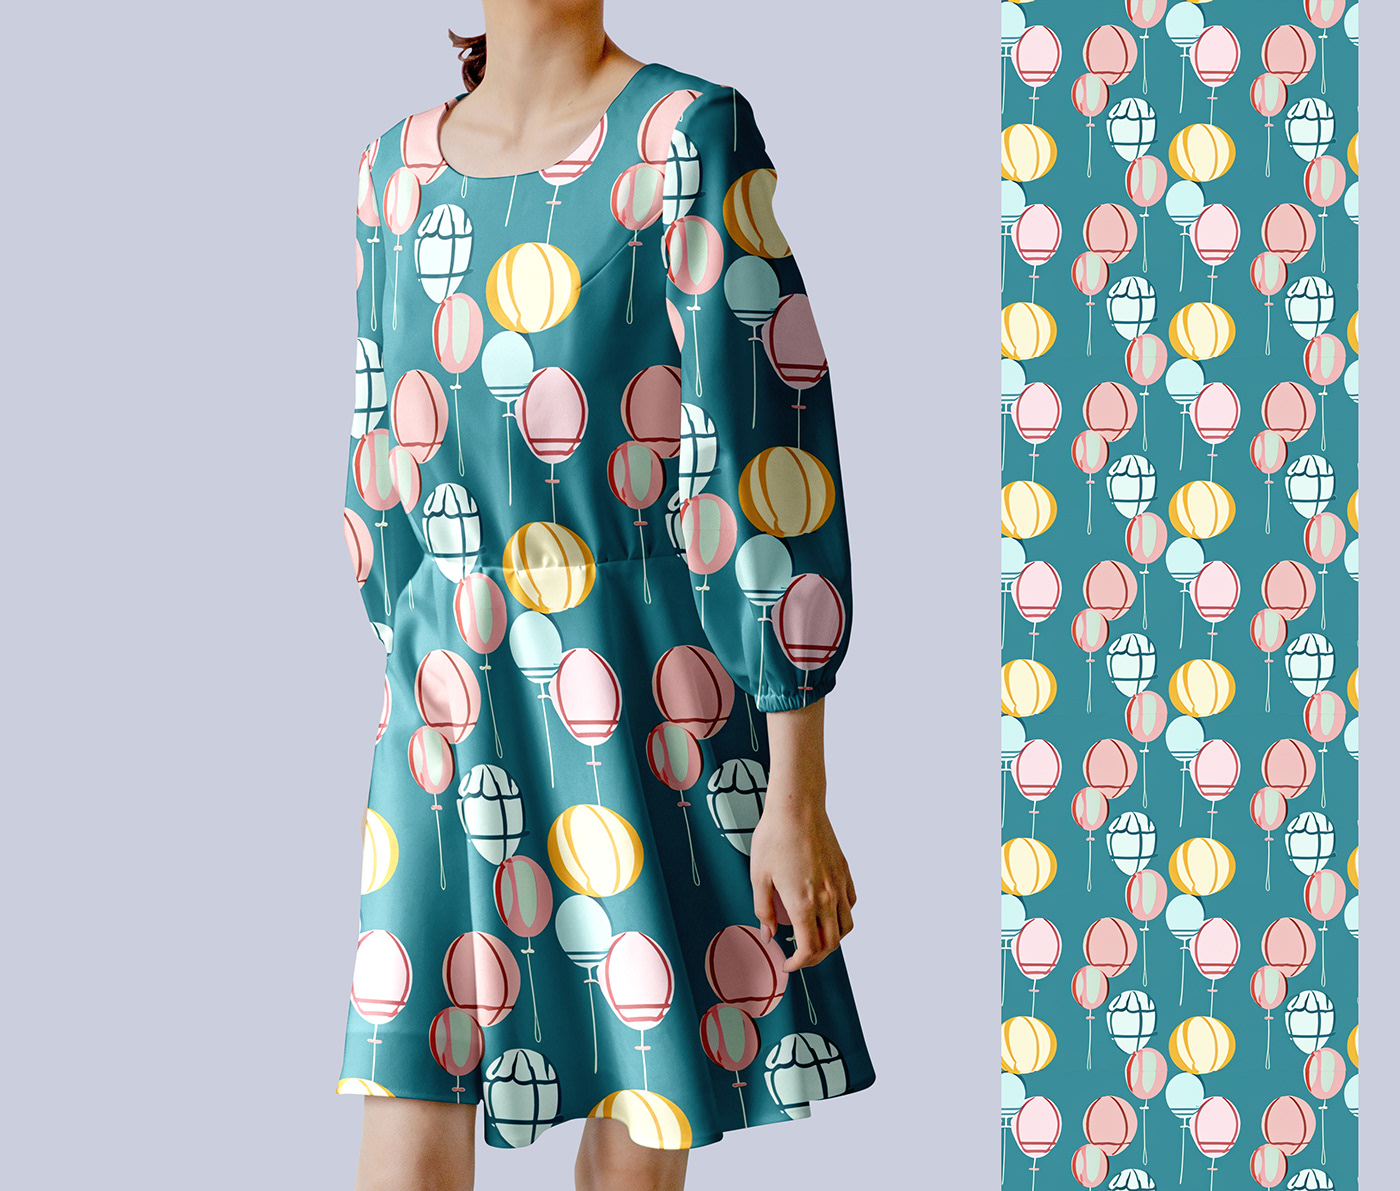 dress design surface design textile funky colorful artwork Patterns and Repeats